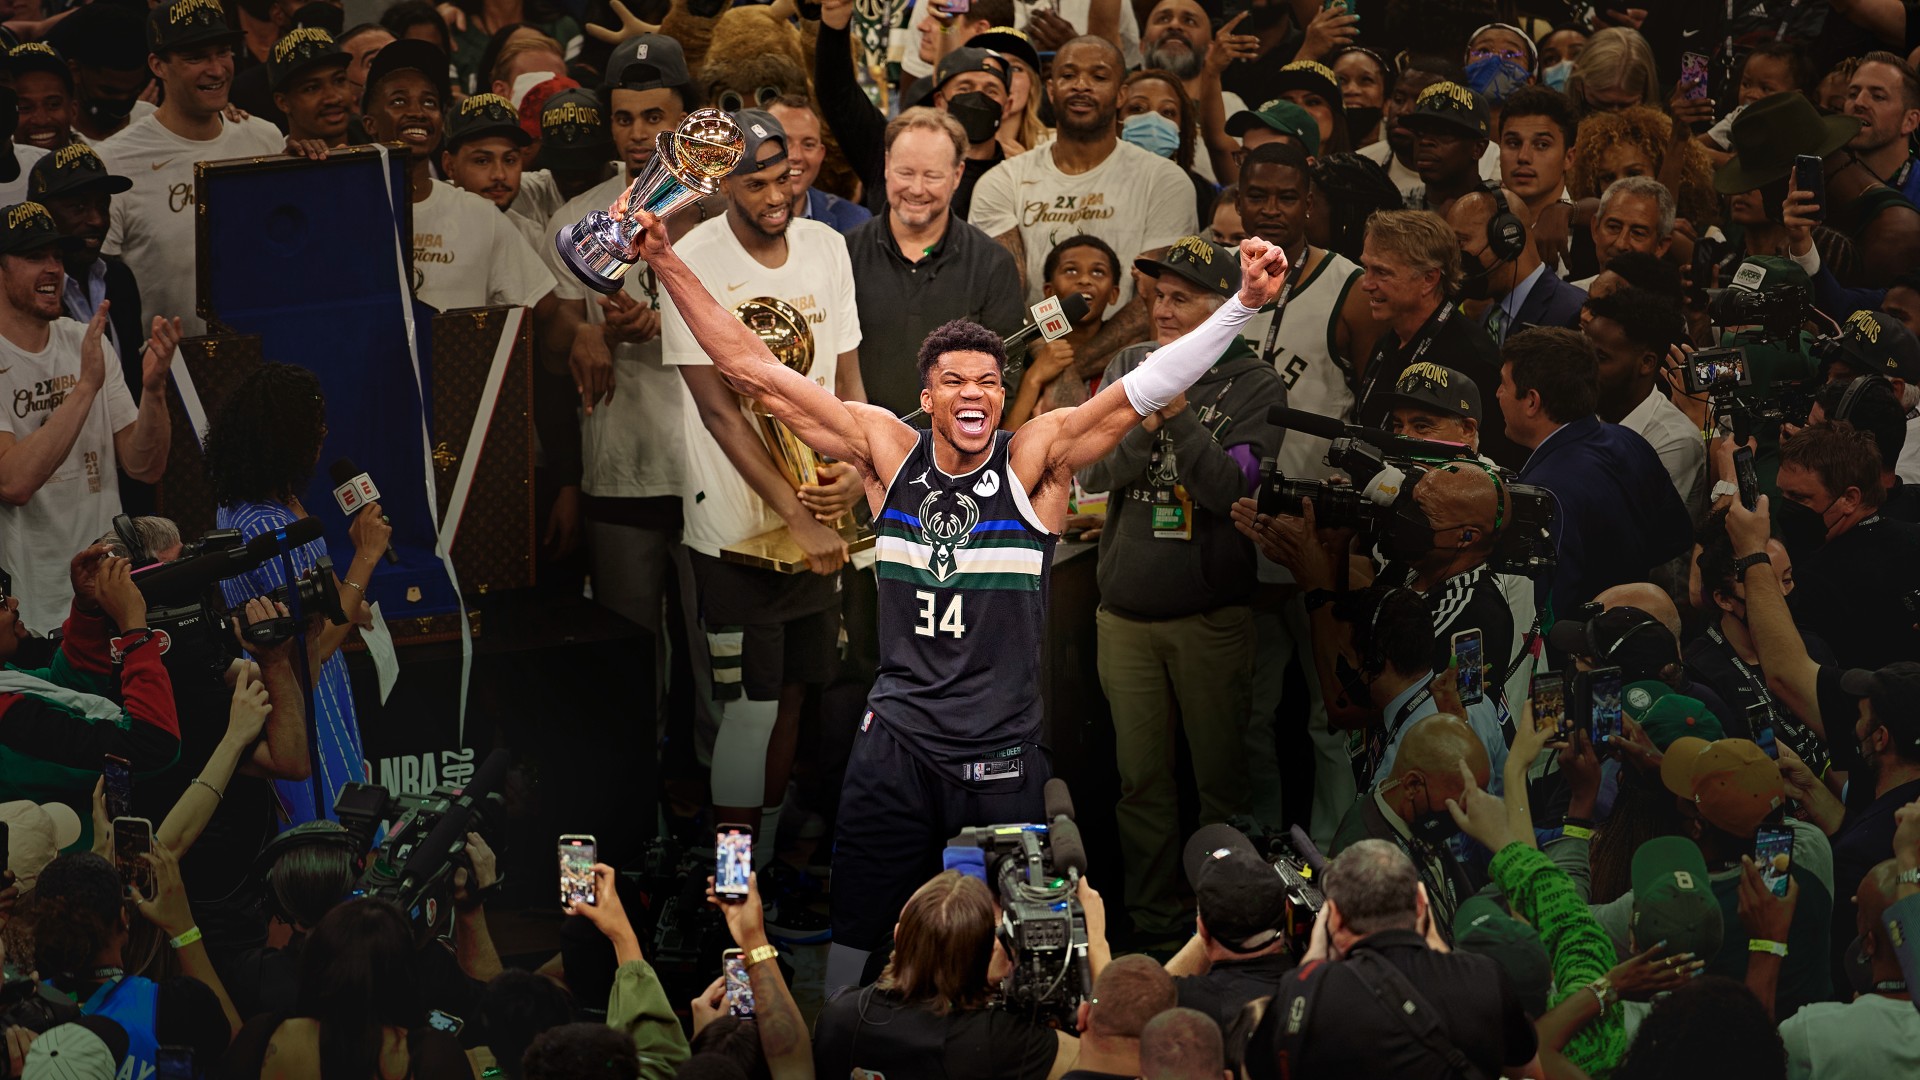 giannis antetokounmpo scored 50 points in game 6 of the nba finals to clinch the nba